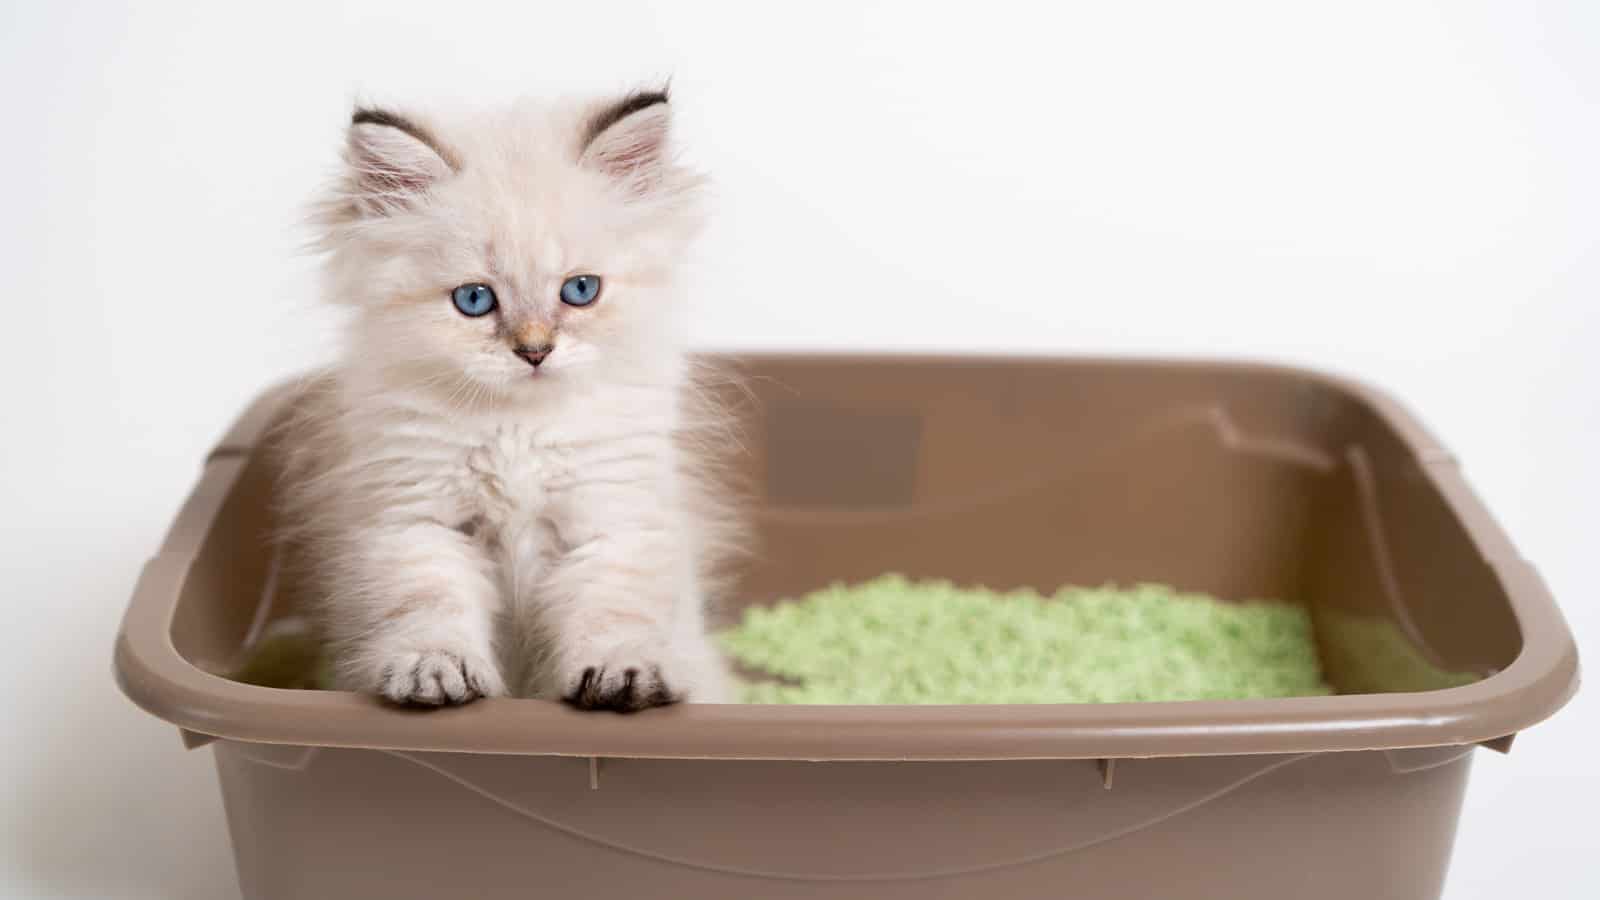 a beautiful white kitten of the British breed is sitting in the cat's toilet, teaching the kitten to the toilet.